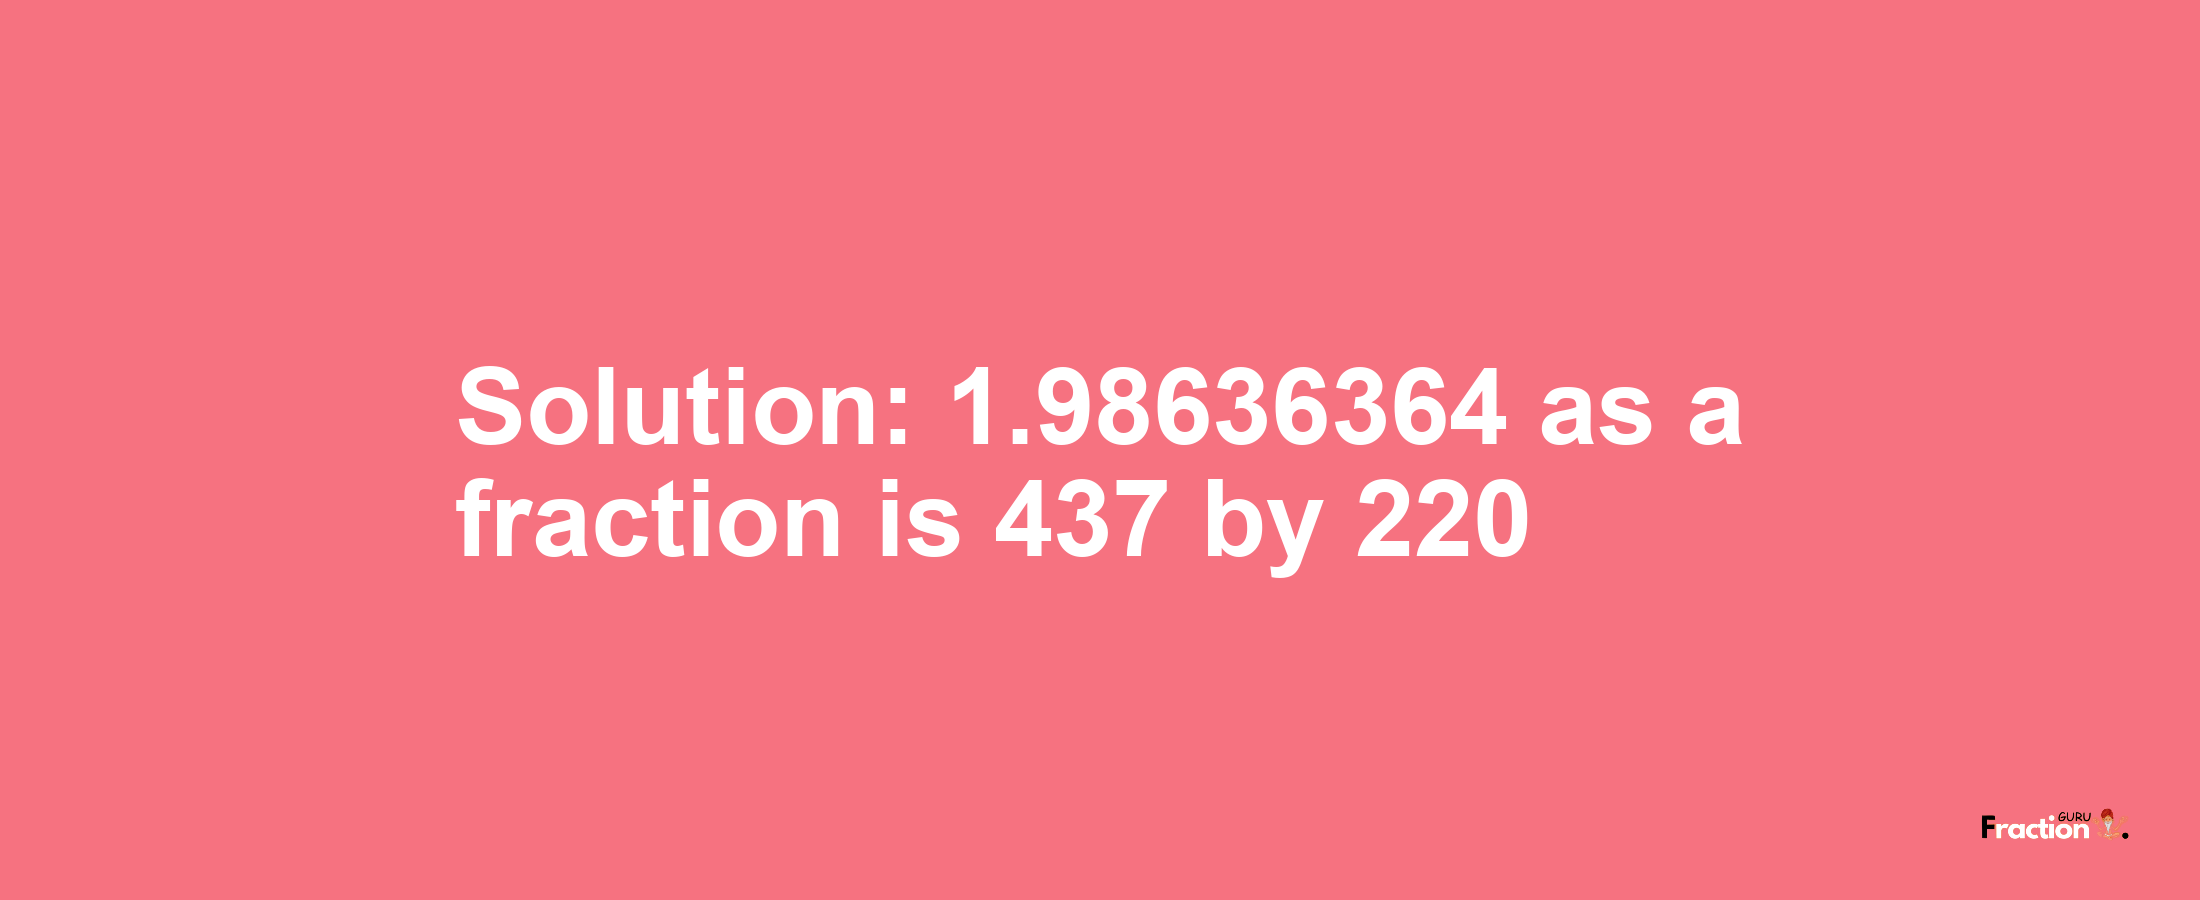 Solution:1.98636364 as a fraction is 437/220